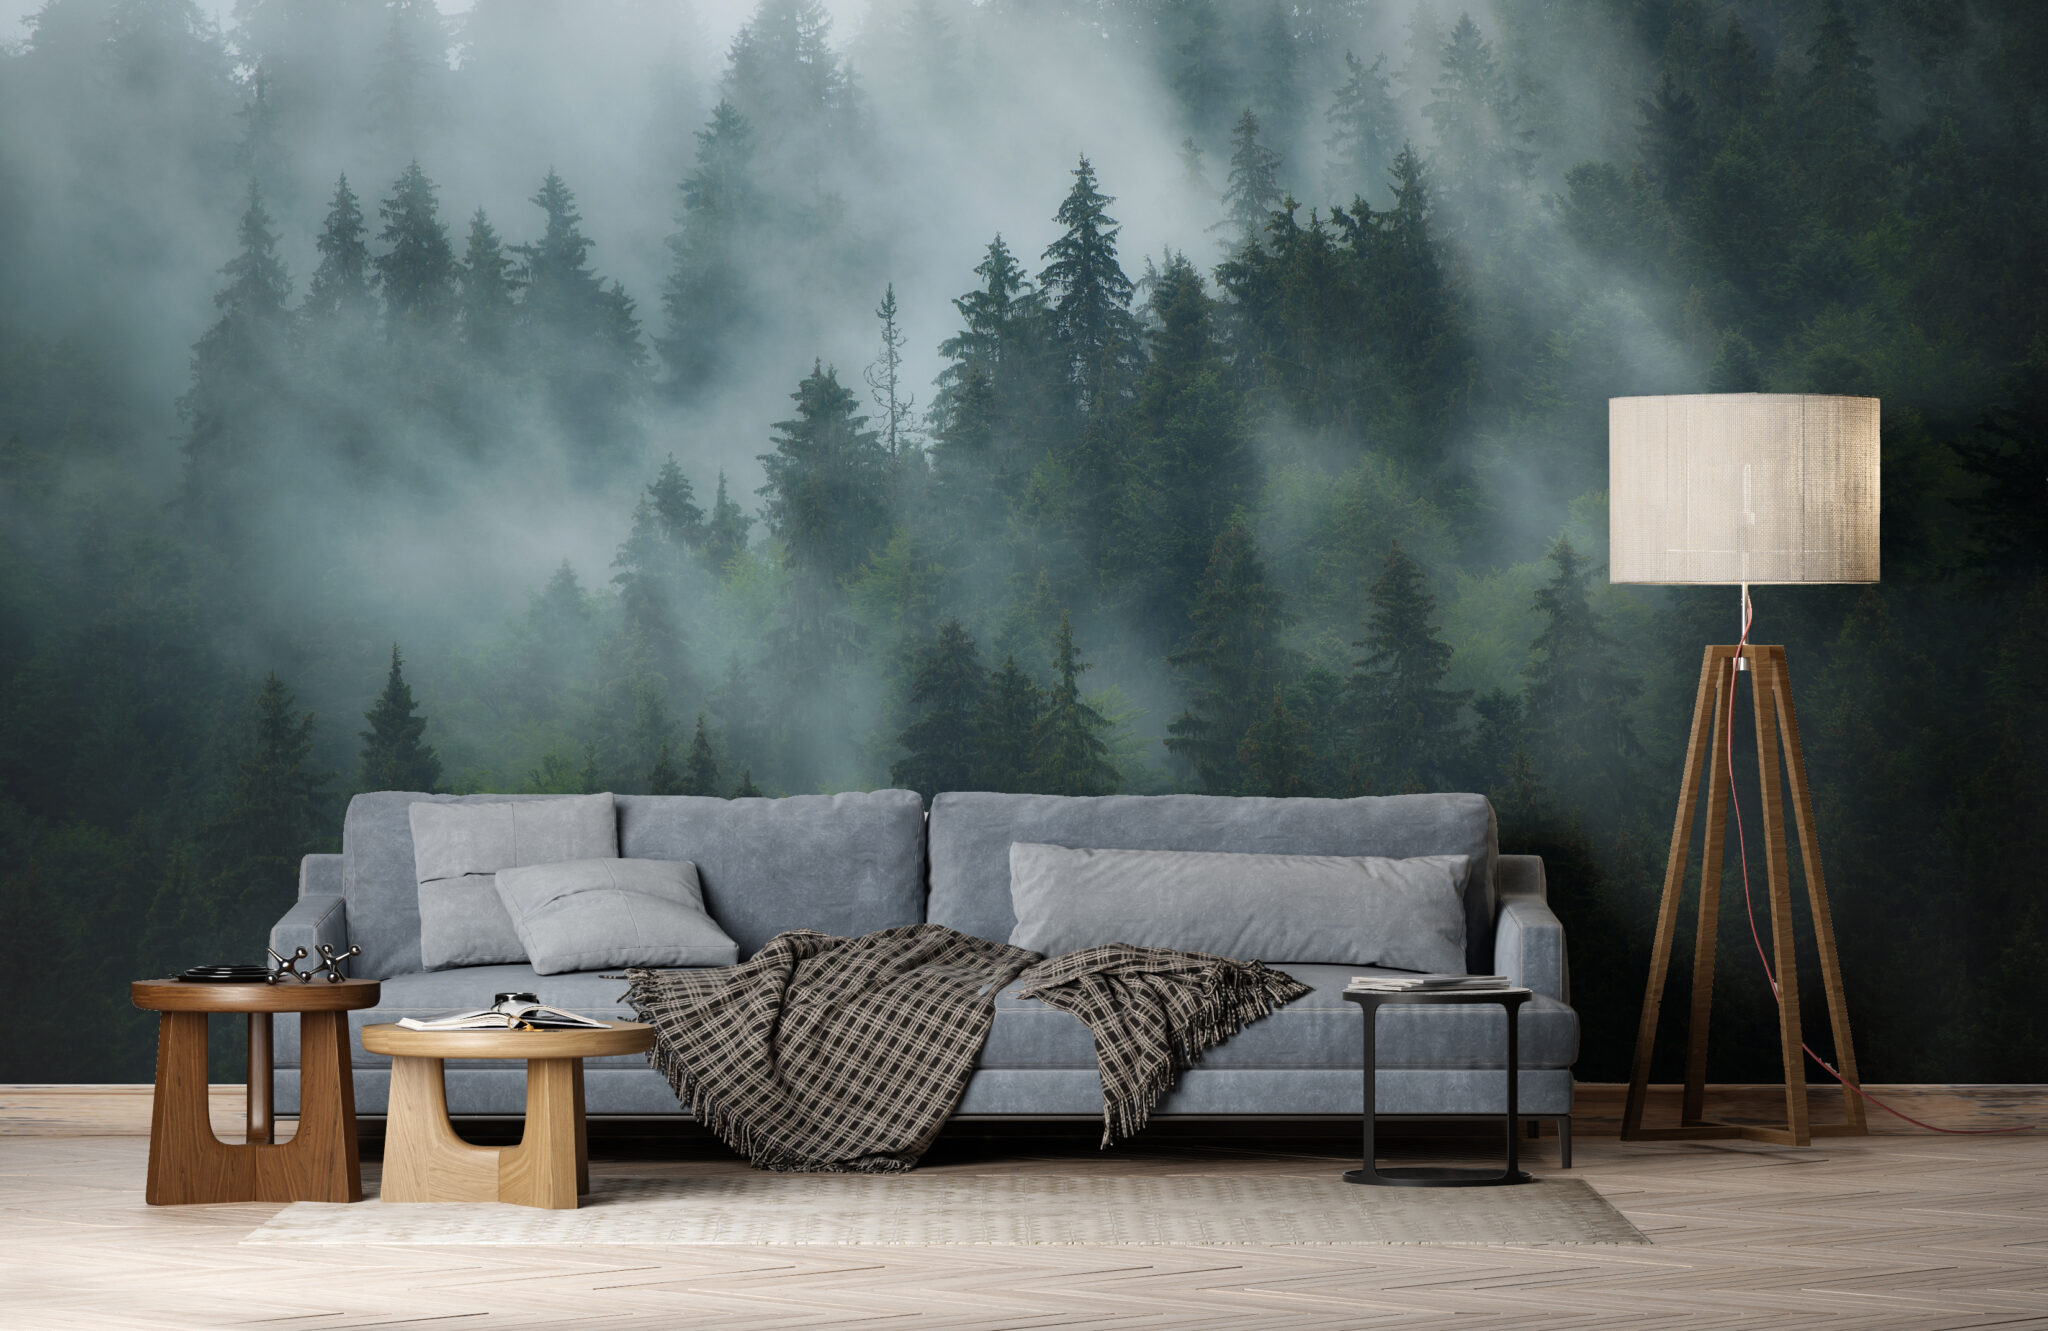 Forests  Woodlands  highquality wall murals  Photowall